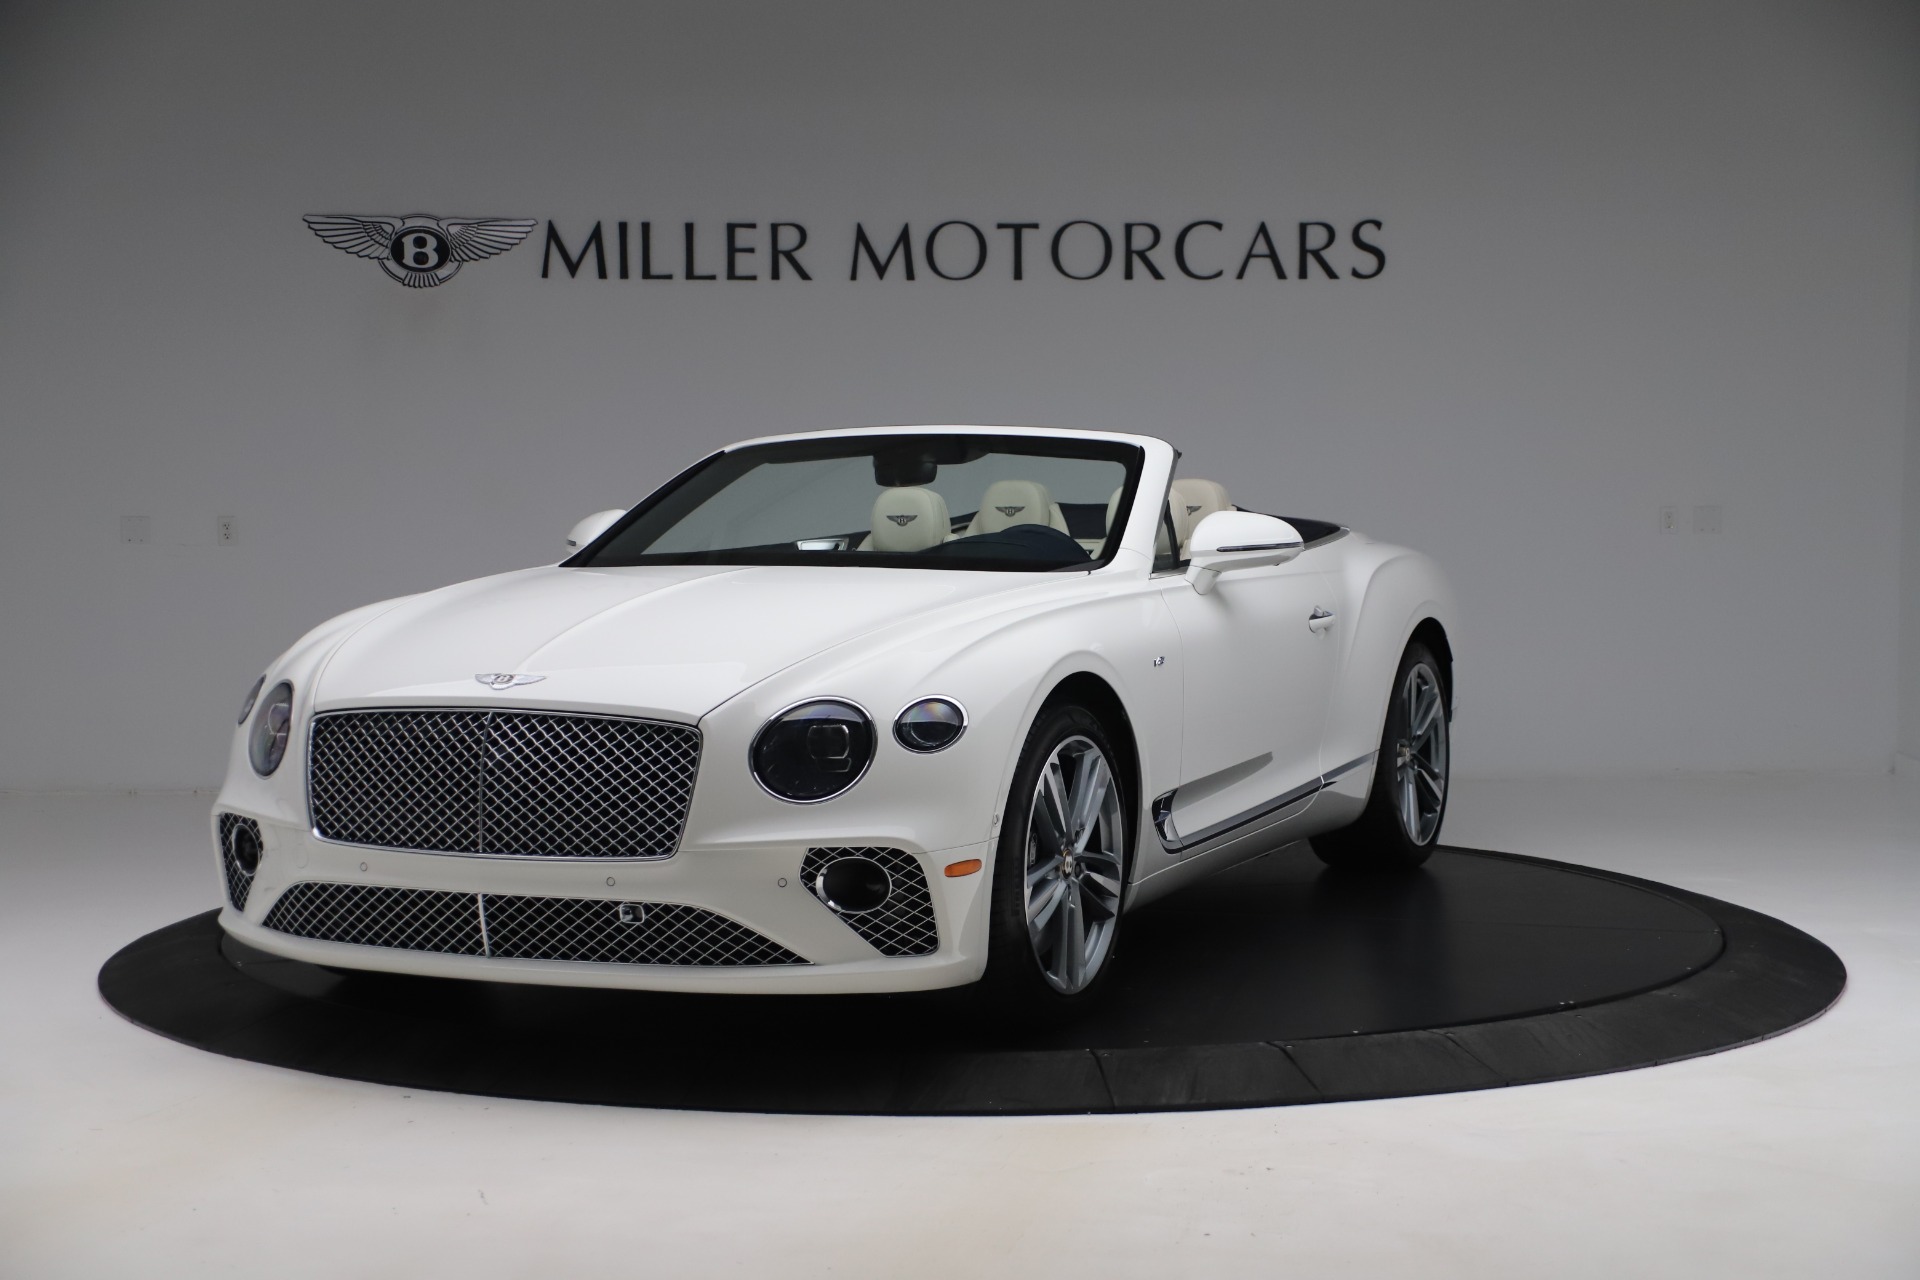 Used 2020 Bentley Continental GTC V8 for sale $184,900 at Pagani of Greenwich in Greenwich CT 06830 1